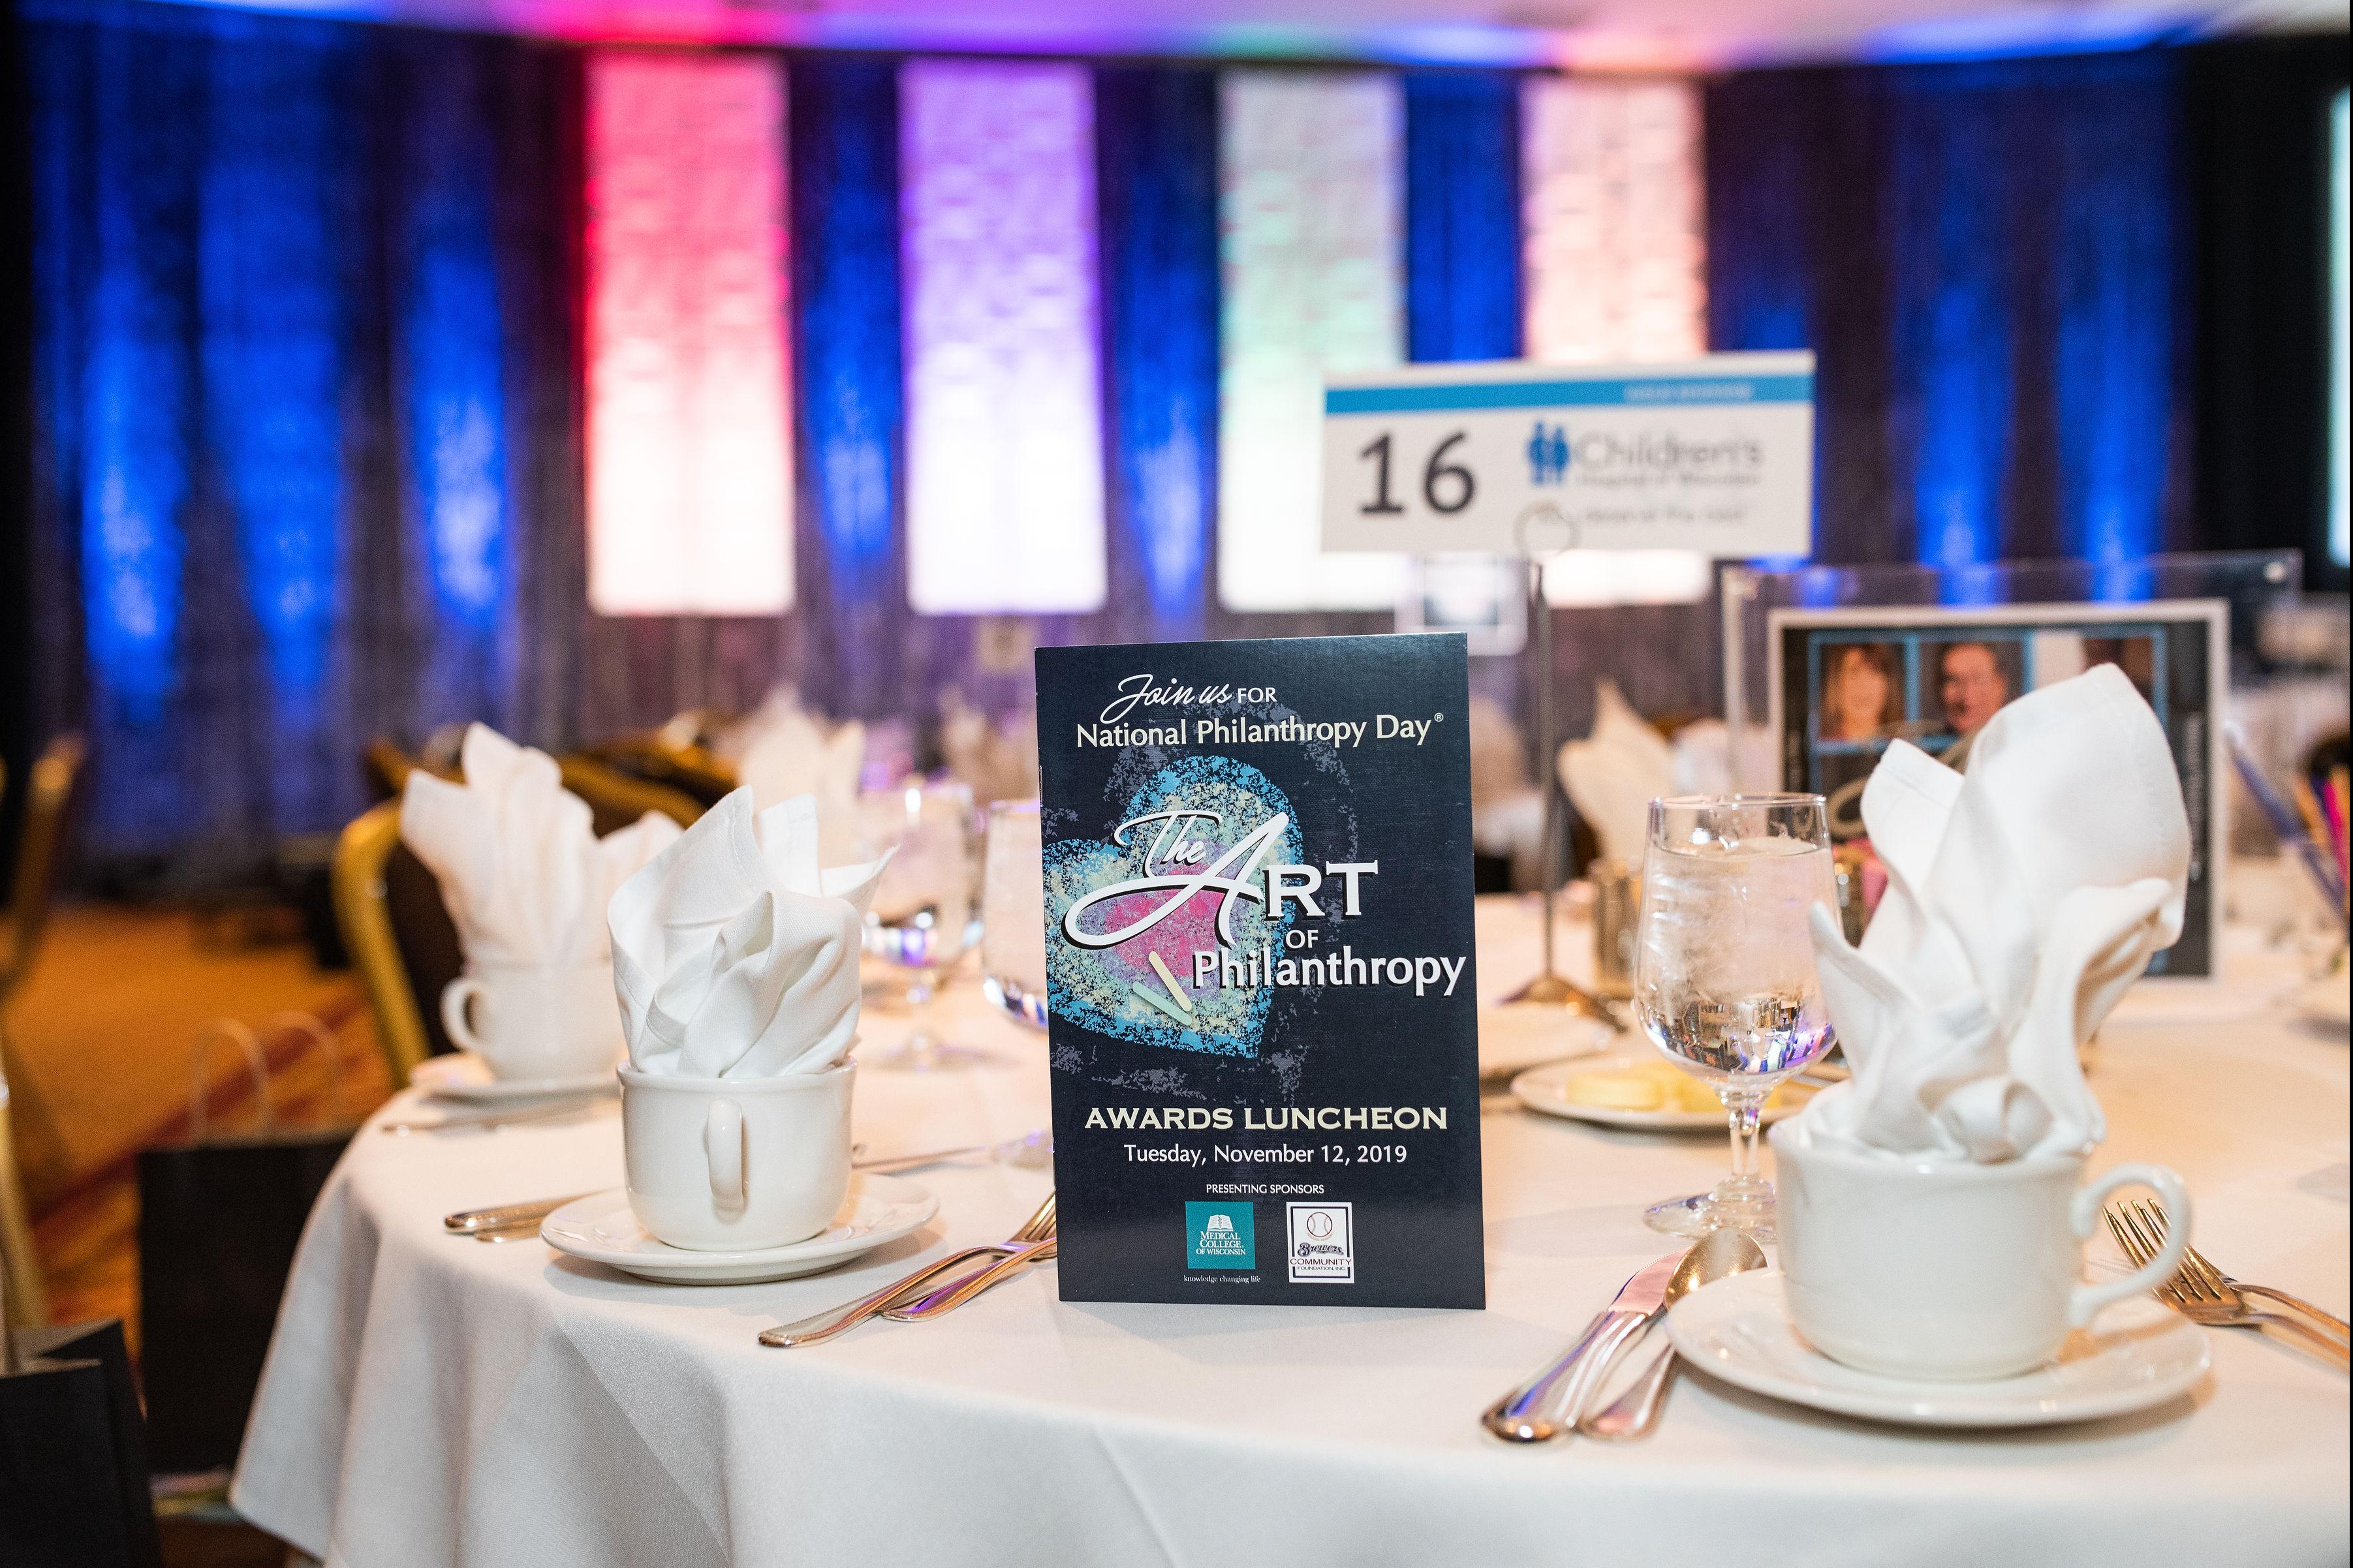 2019 National Philanthropy Day program and table setting